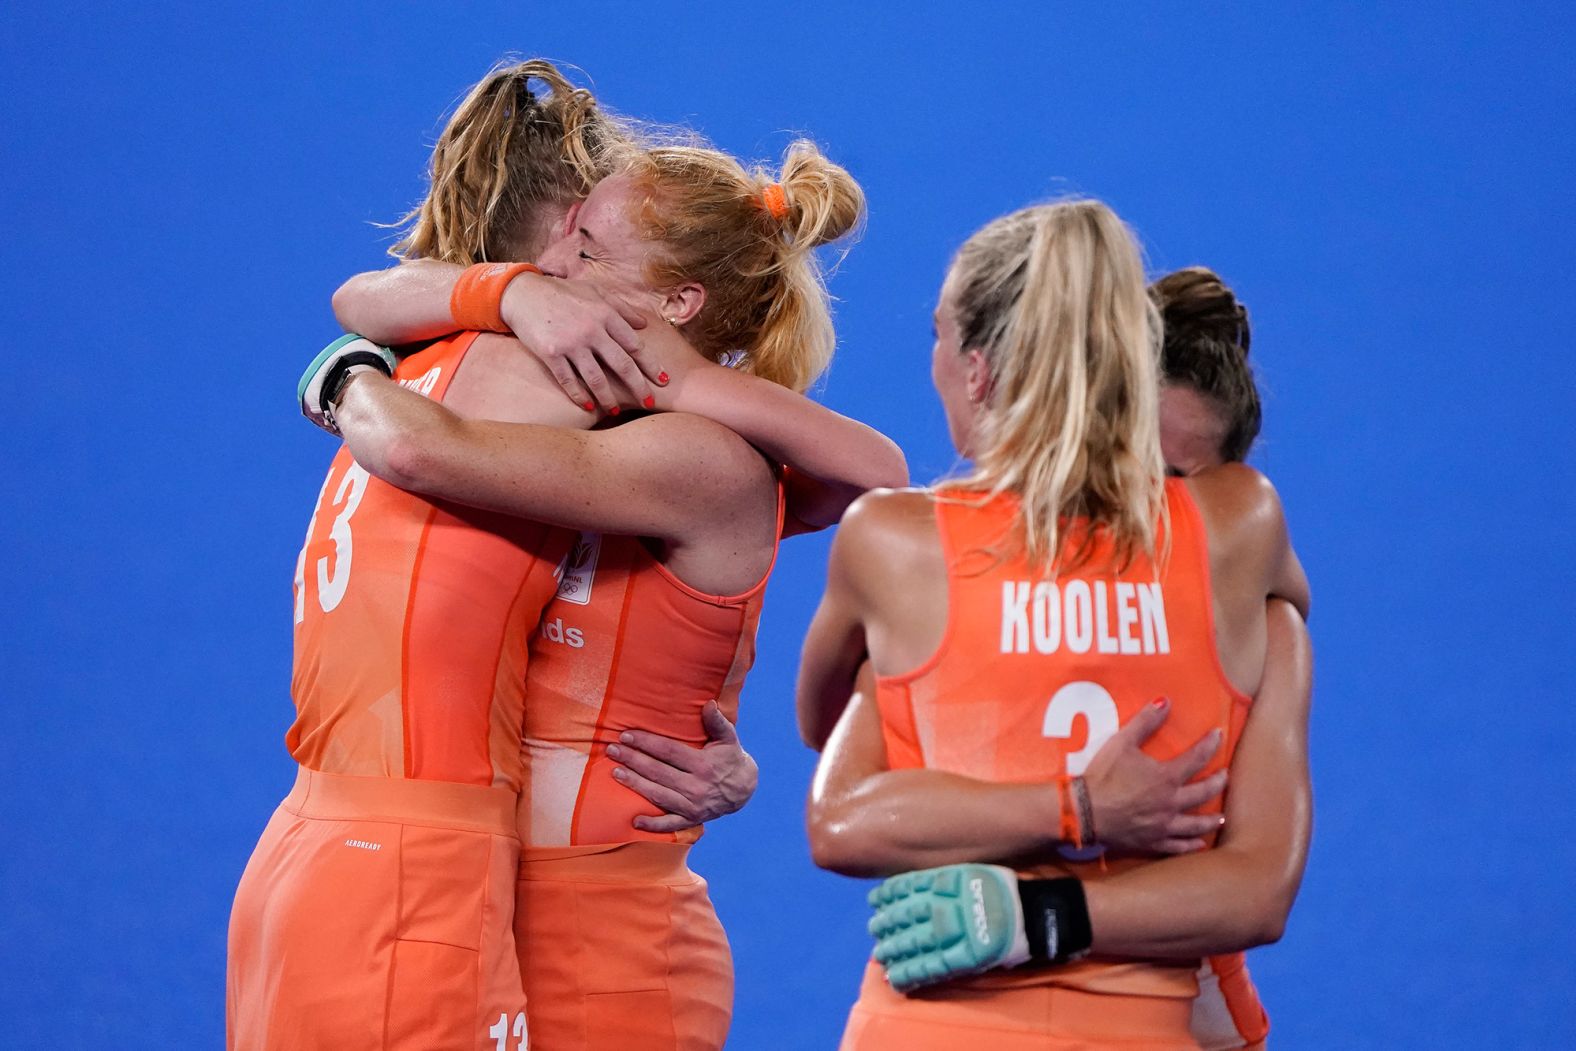 The Netherlands' field hockey team celebrates their 3-1 win over Argentina in the gold-medal match on August 6. The Netherlands became the first country <a href="index.php?page=&url=https%3A%2F%2Fwww.cnn.com%2Fworld%2Flive-news%2Ftokyo-2020-olympics-08-06-21-spt%2Fh_ee43255a21088856e898b0025af865cc" target="_blank">to win four Olympic titles</a> in women's field hockey.